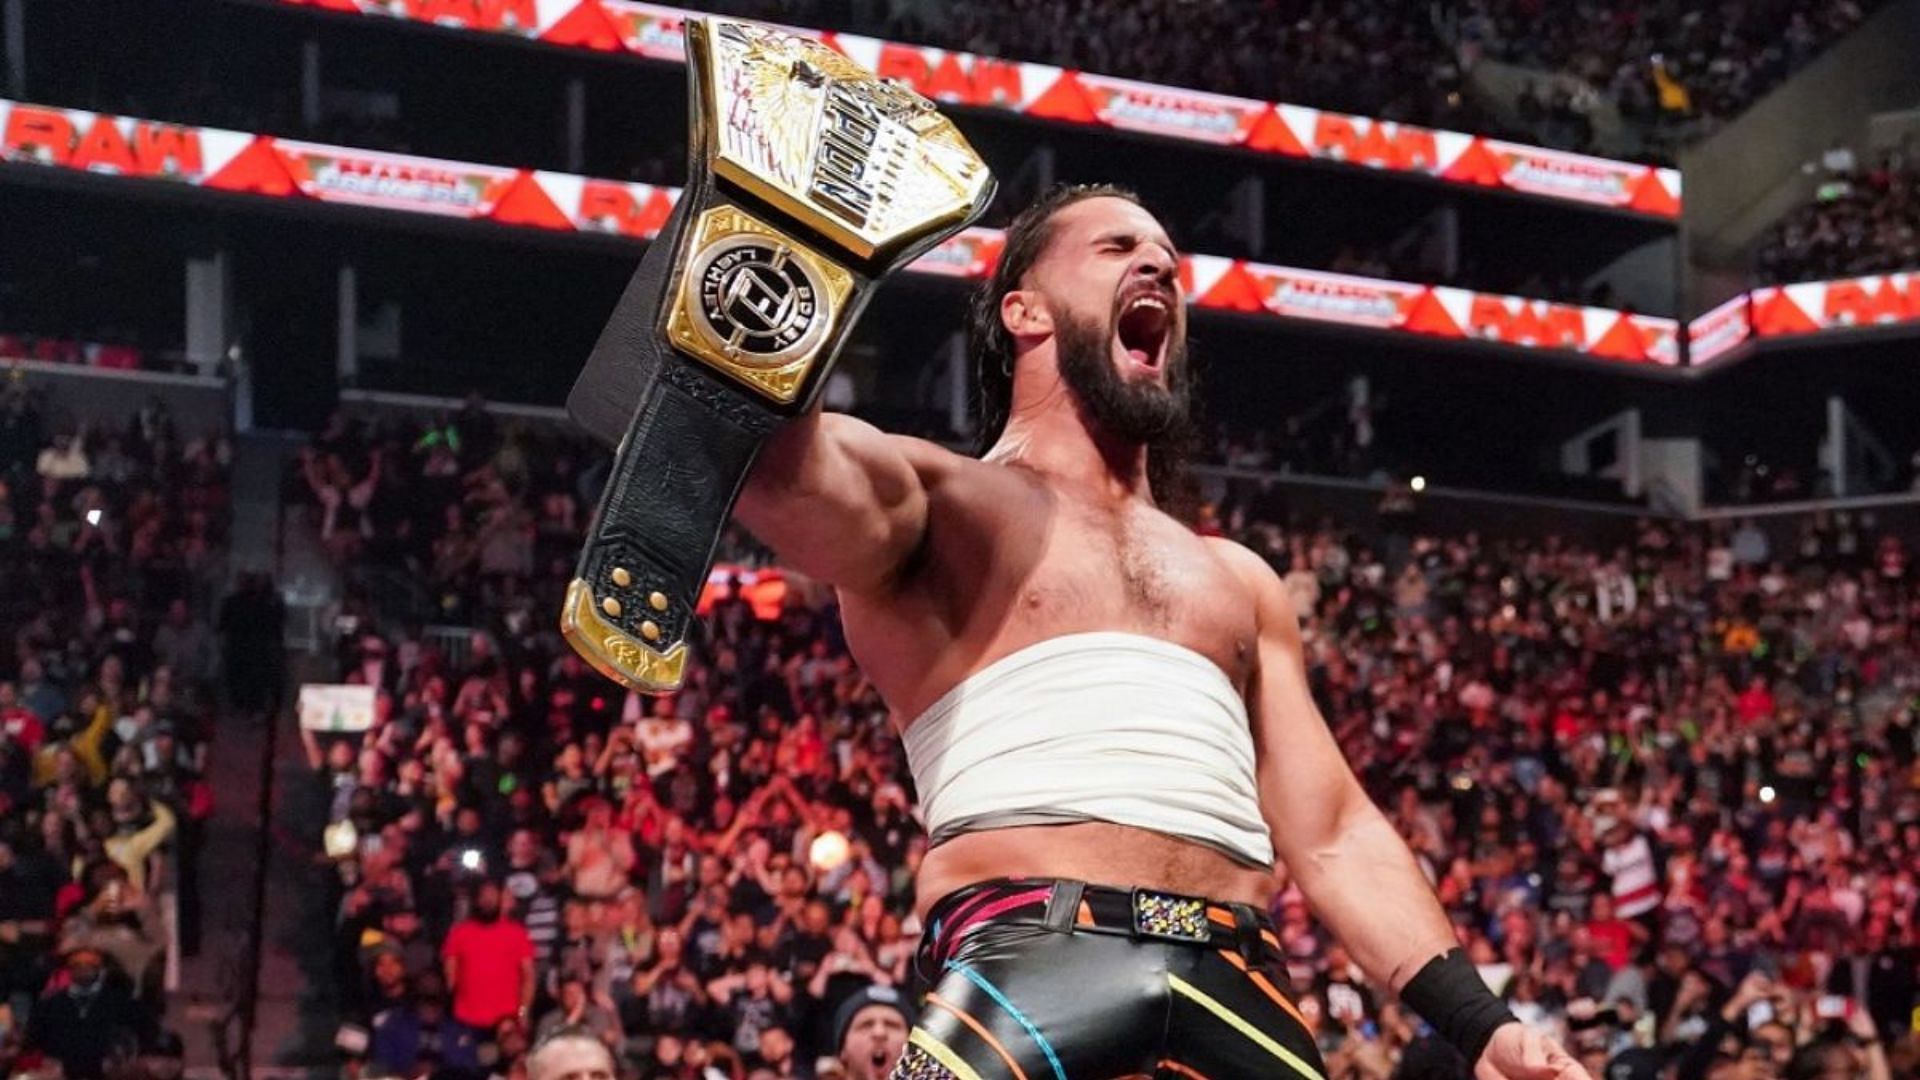 Seth Rollins is the current WWE United States Champion